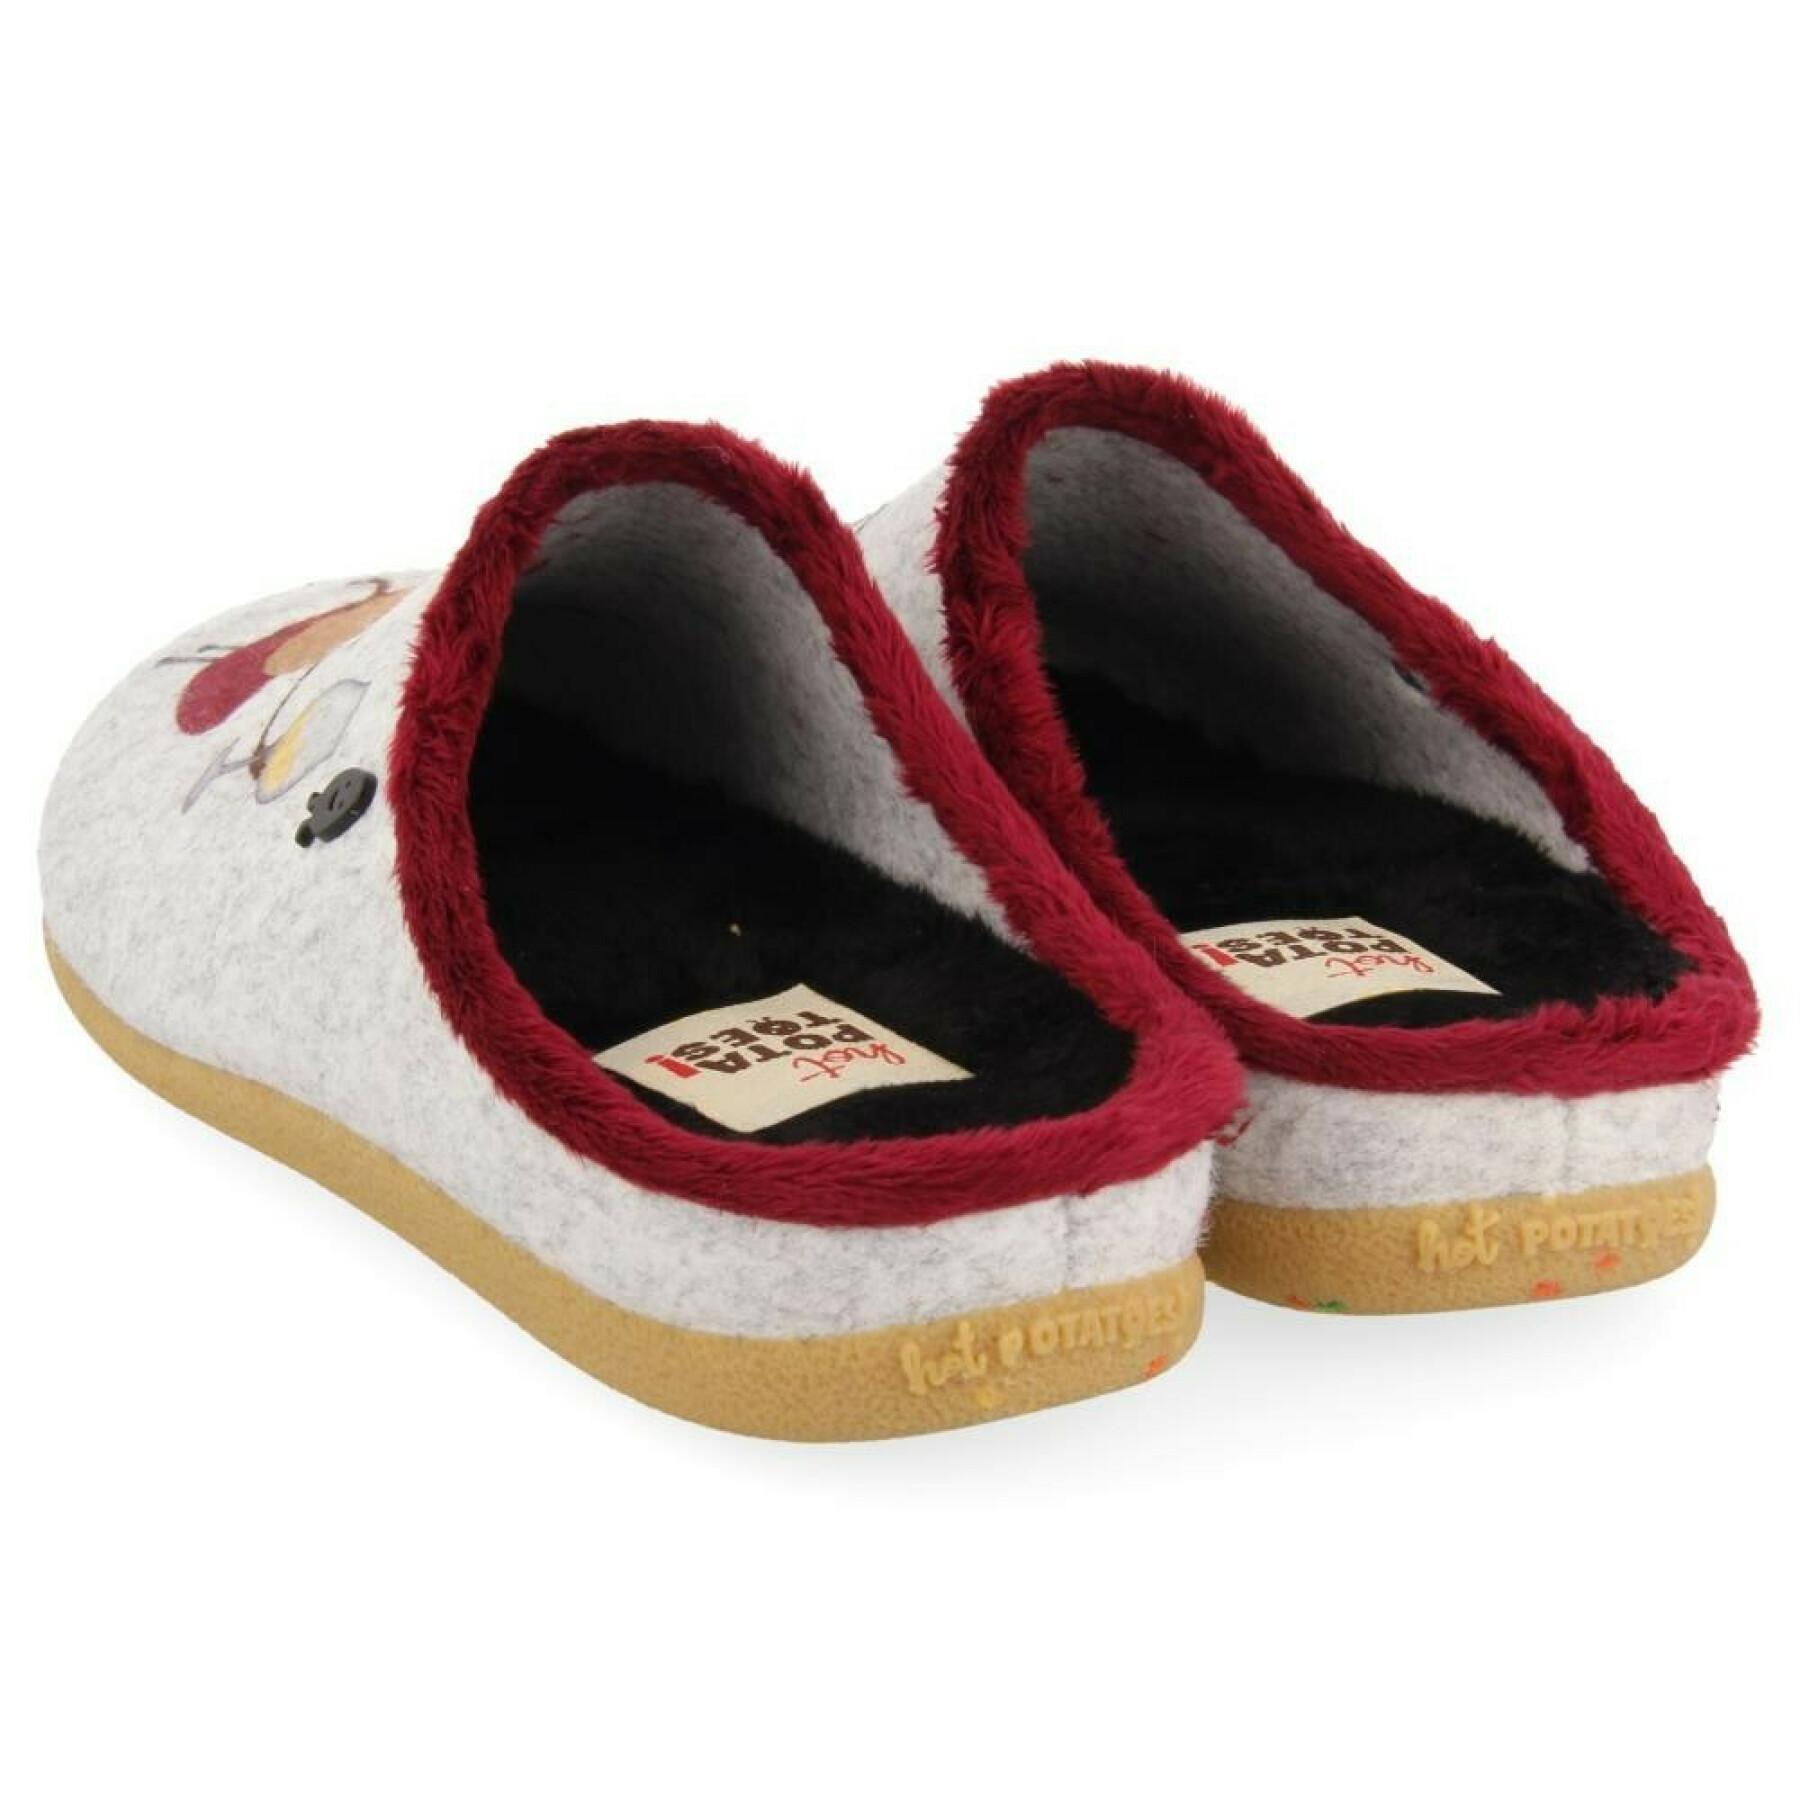 Slippers from the women's collection Hot Potatoes drosing